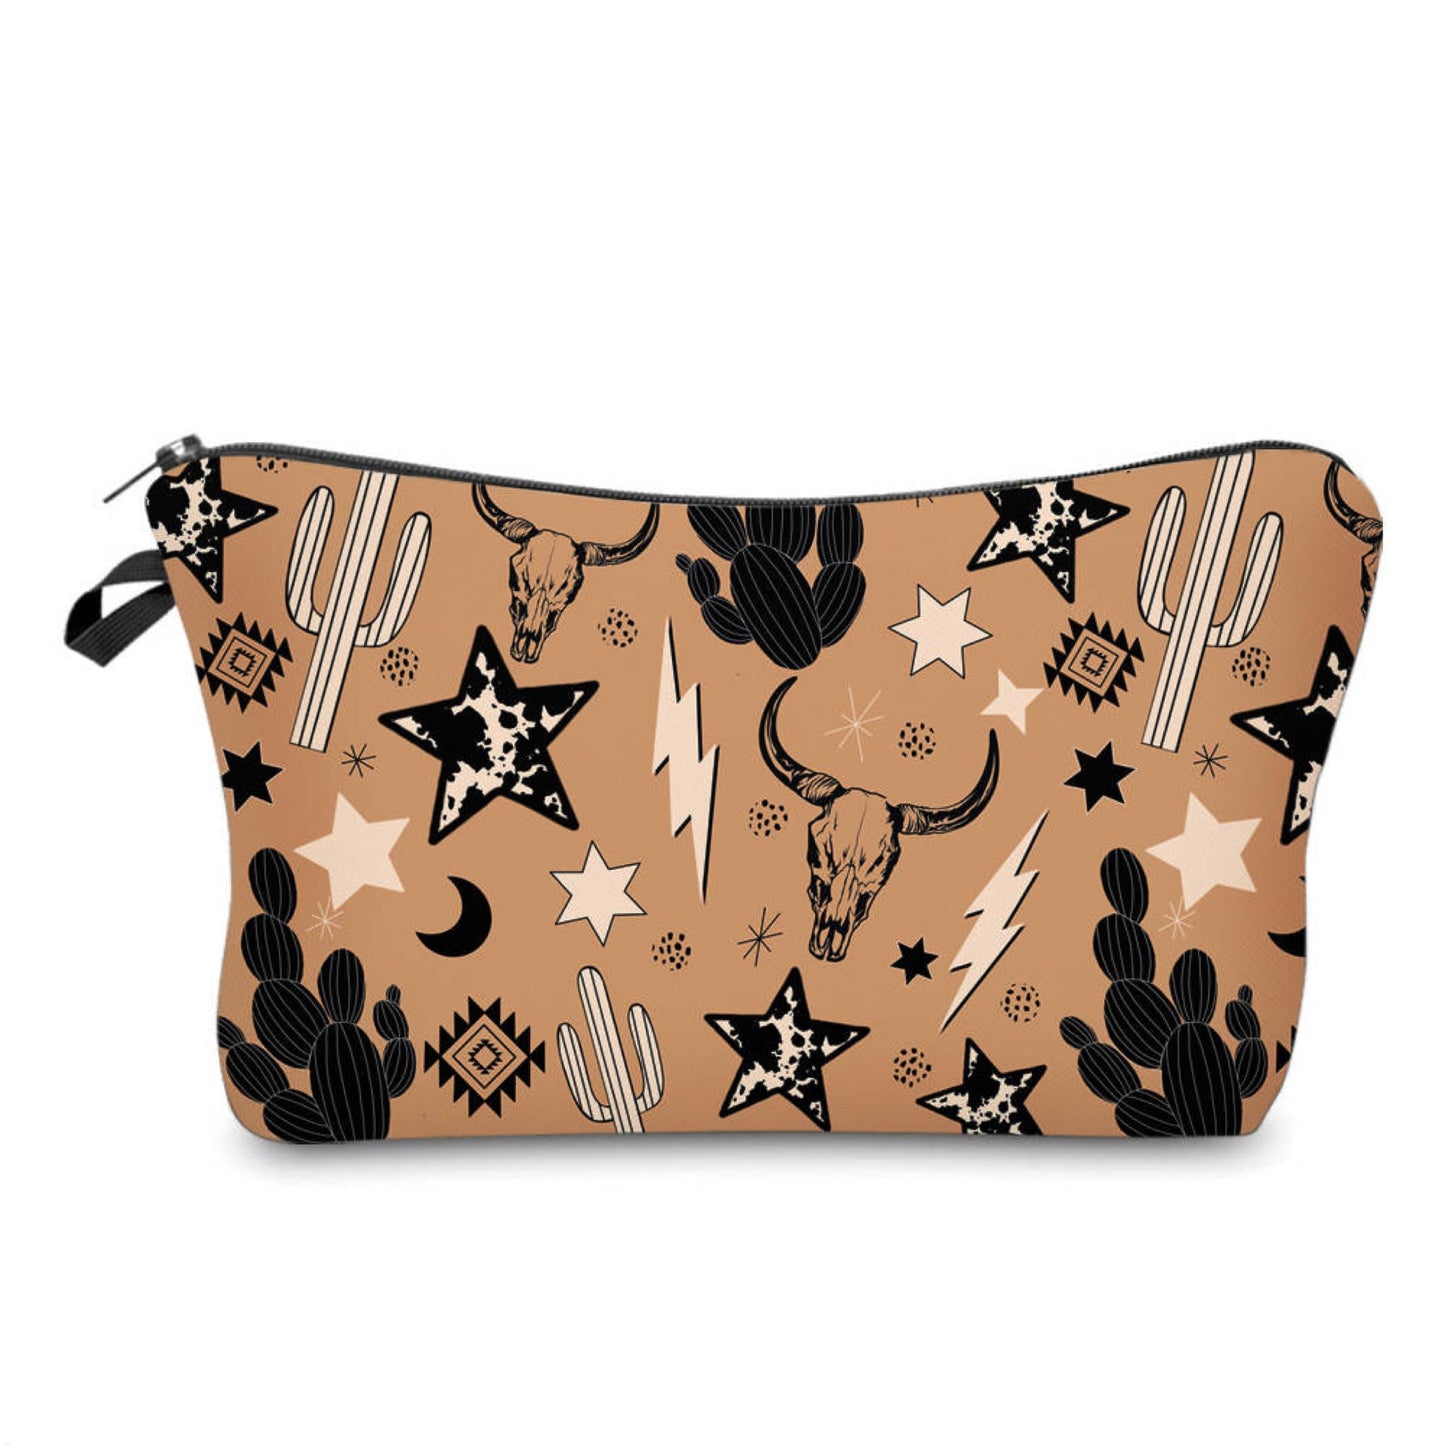 Western BoHo - Water-Resistant Multi-Use Pouch